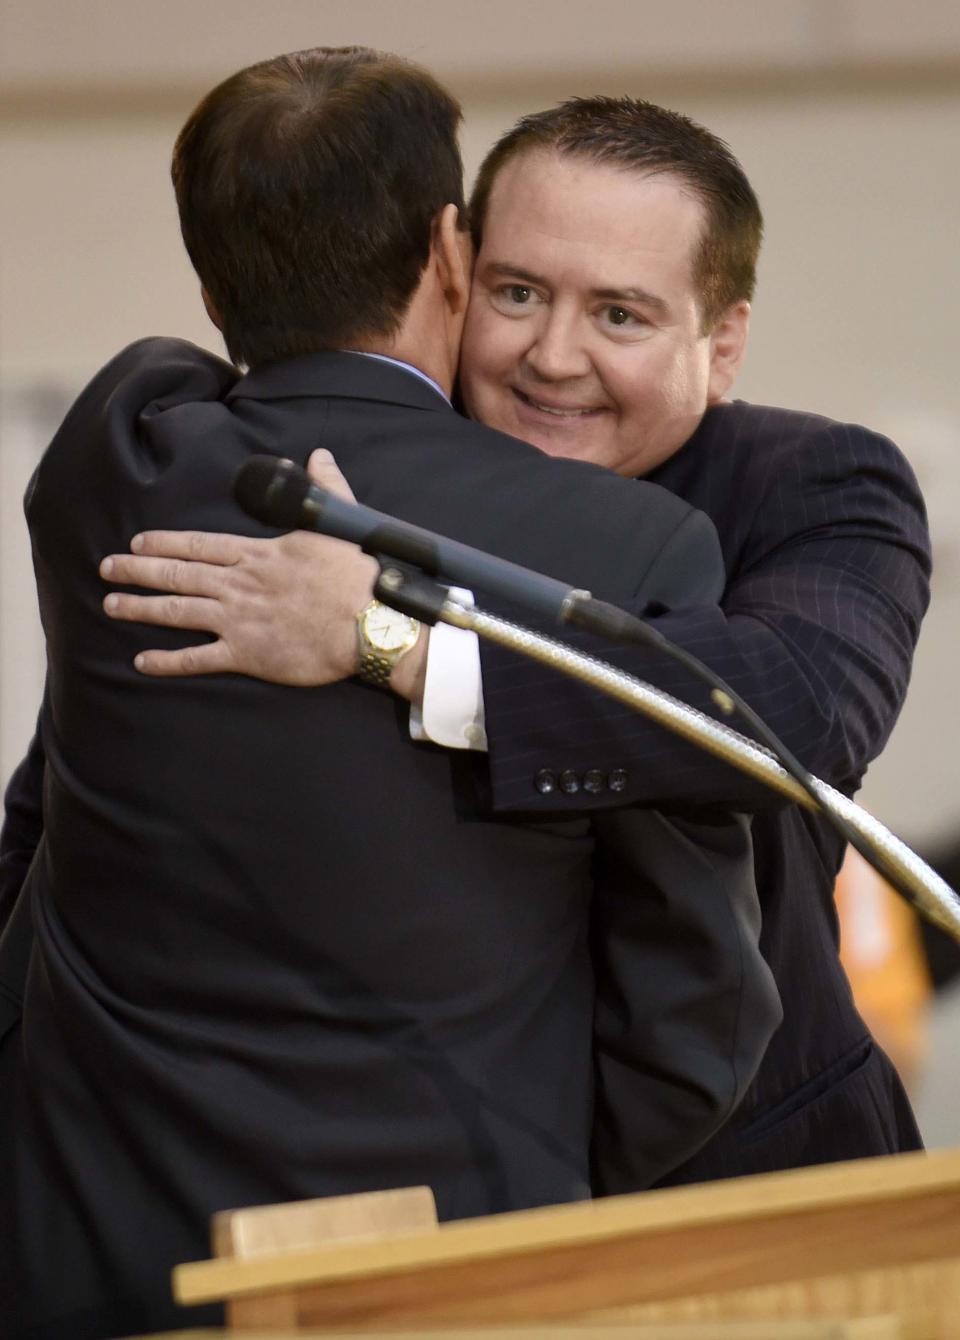 Tennessee men's basketball coach Donnie Tyndall, right, is hugged by athletic director Dave Hart during a news conference Tuesday, April 22, 2014, in Knoxville, Tenn. The former Southern Mississippi coach succeeds Cuonzo Martin, who resigned last week to take the head job at California. (AP Photo/Knoxville News Sentinel, Amy Smotherman Burgess)